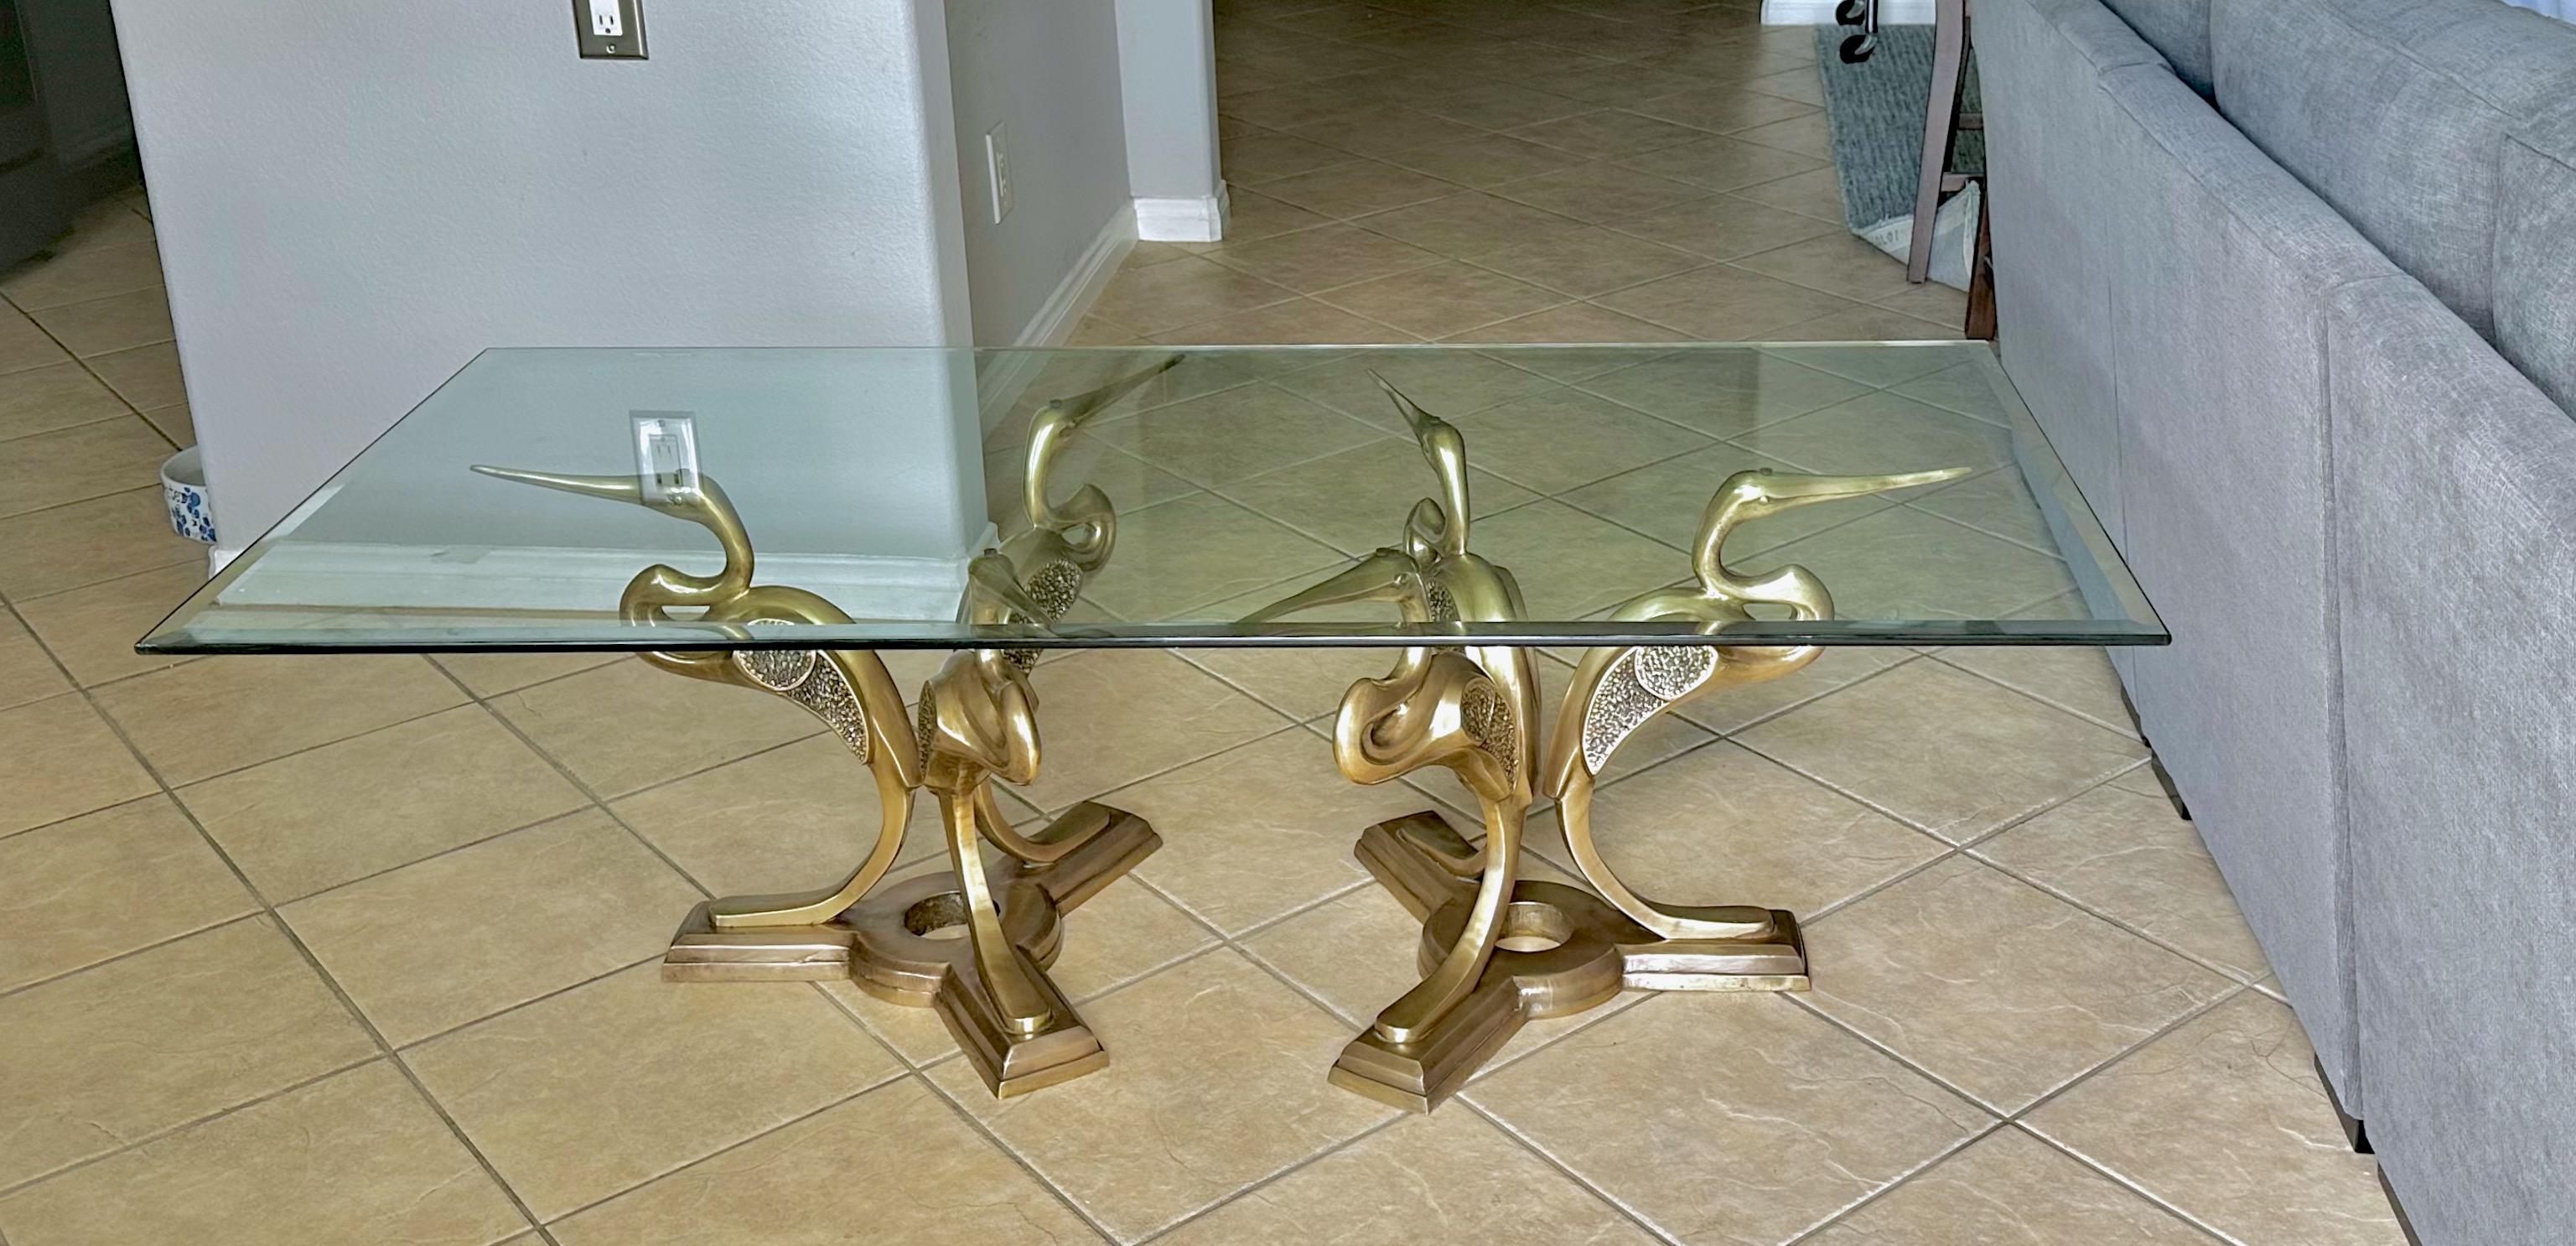 Crane or Heron bird form cast bronze or brass coffee table in style of Willy Daro. Includes thick beveled edge glass top. The two table bases are identical, each with 3 cranes forming a tripod. Rare to see this style table especially a pair. Has the